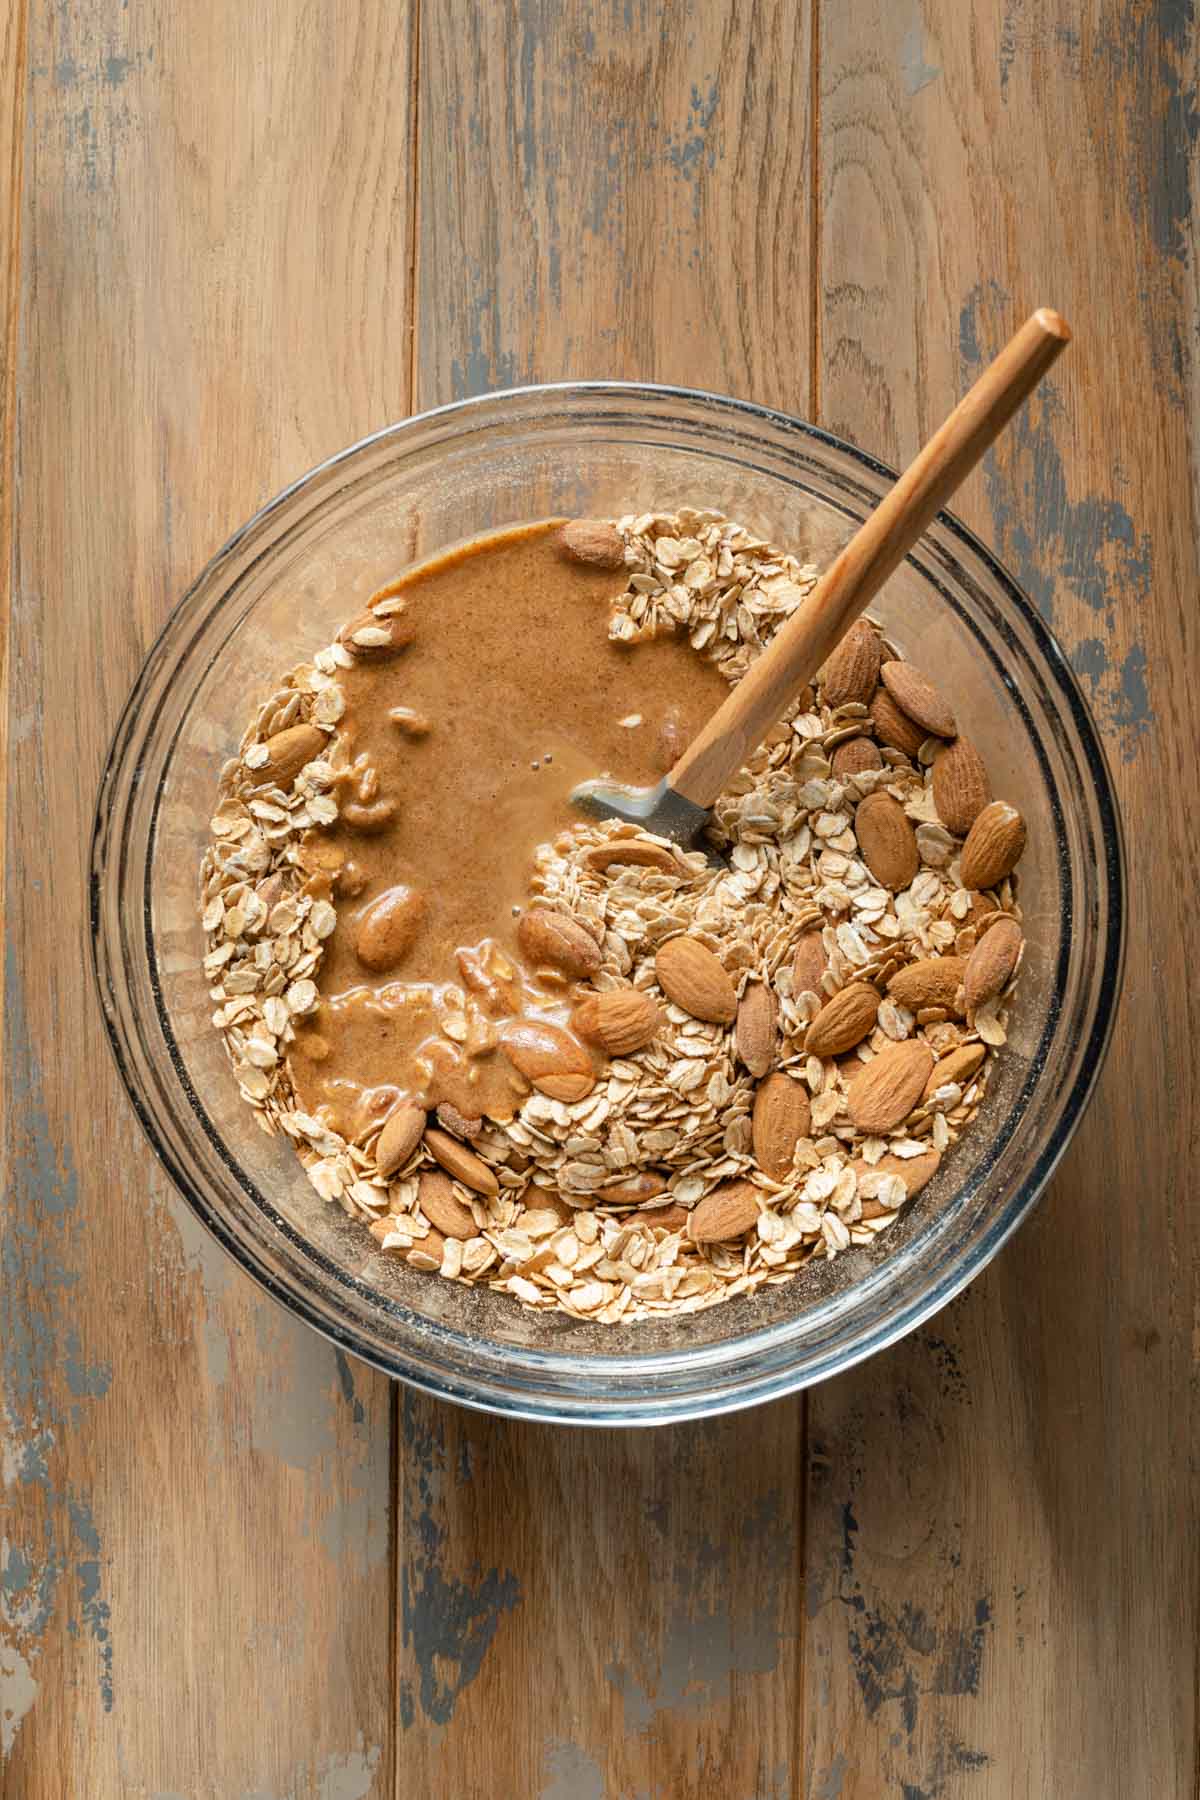 Overhead view of granola ingredients added to a glass bowl.